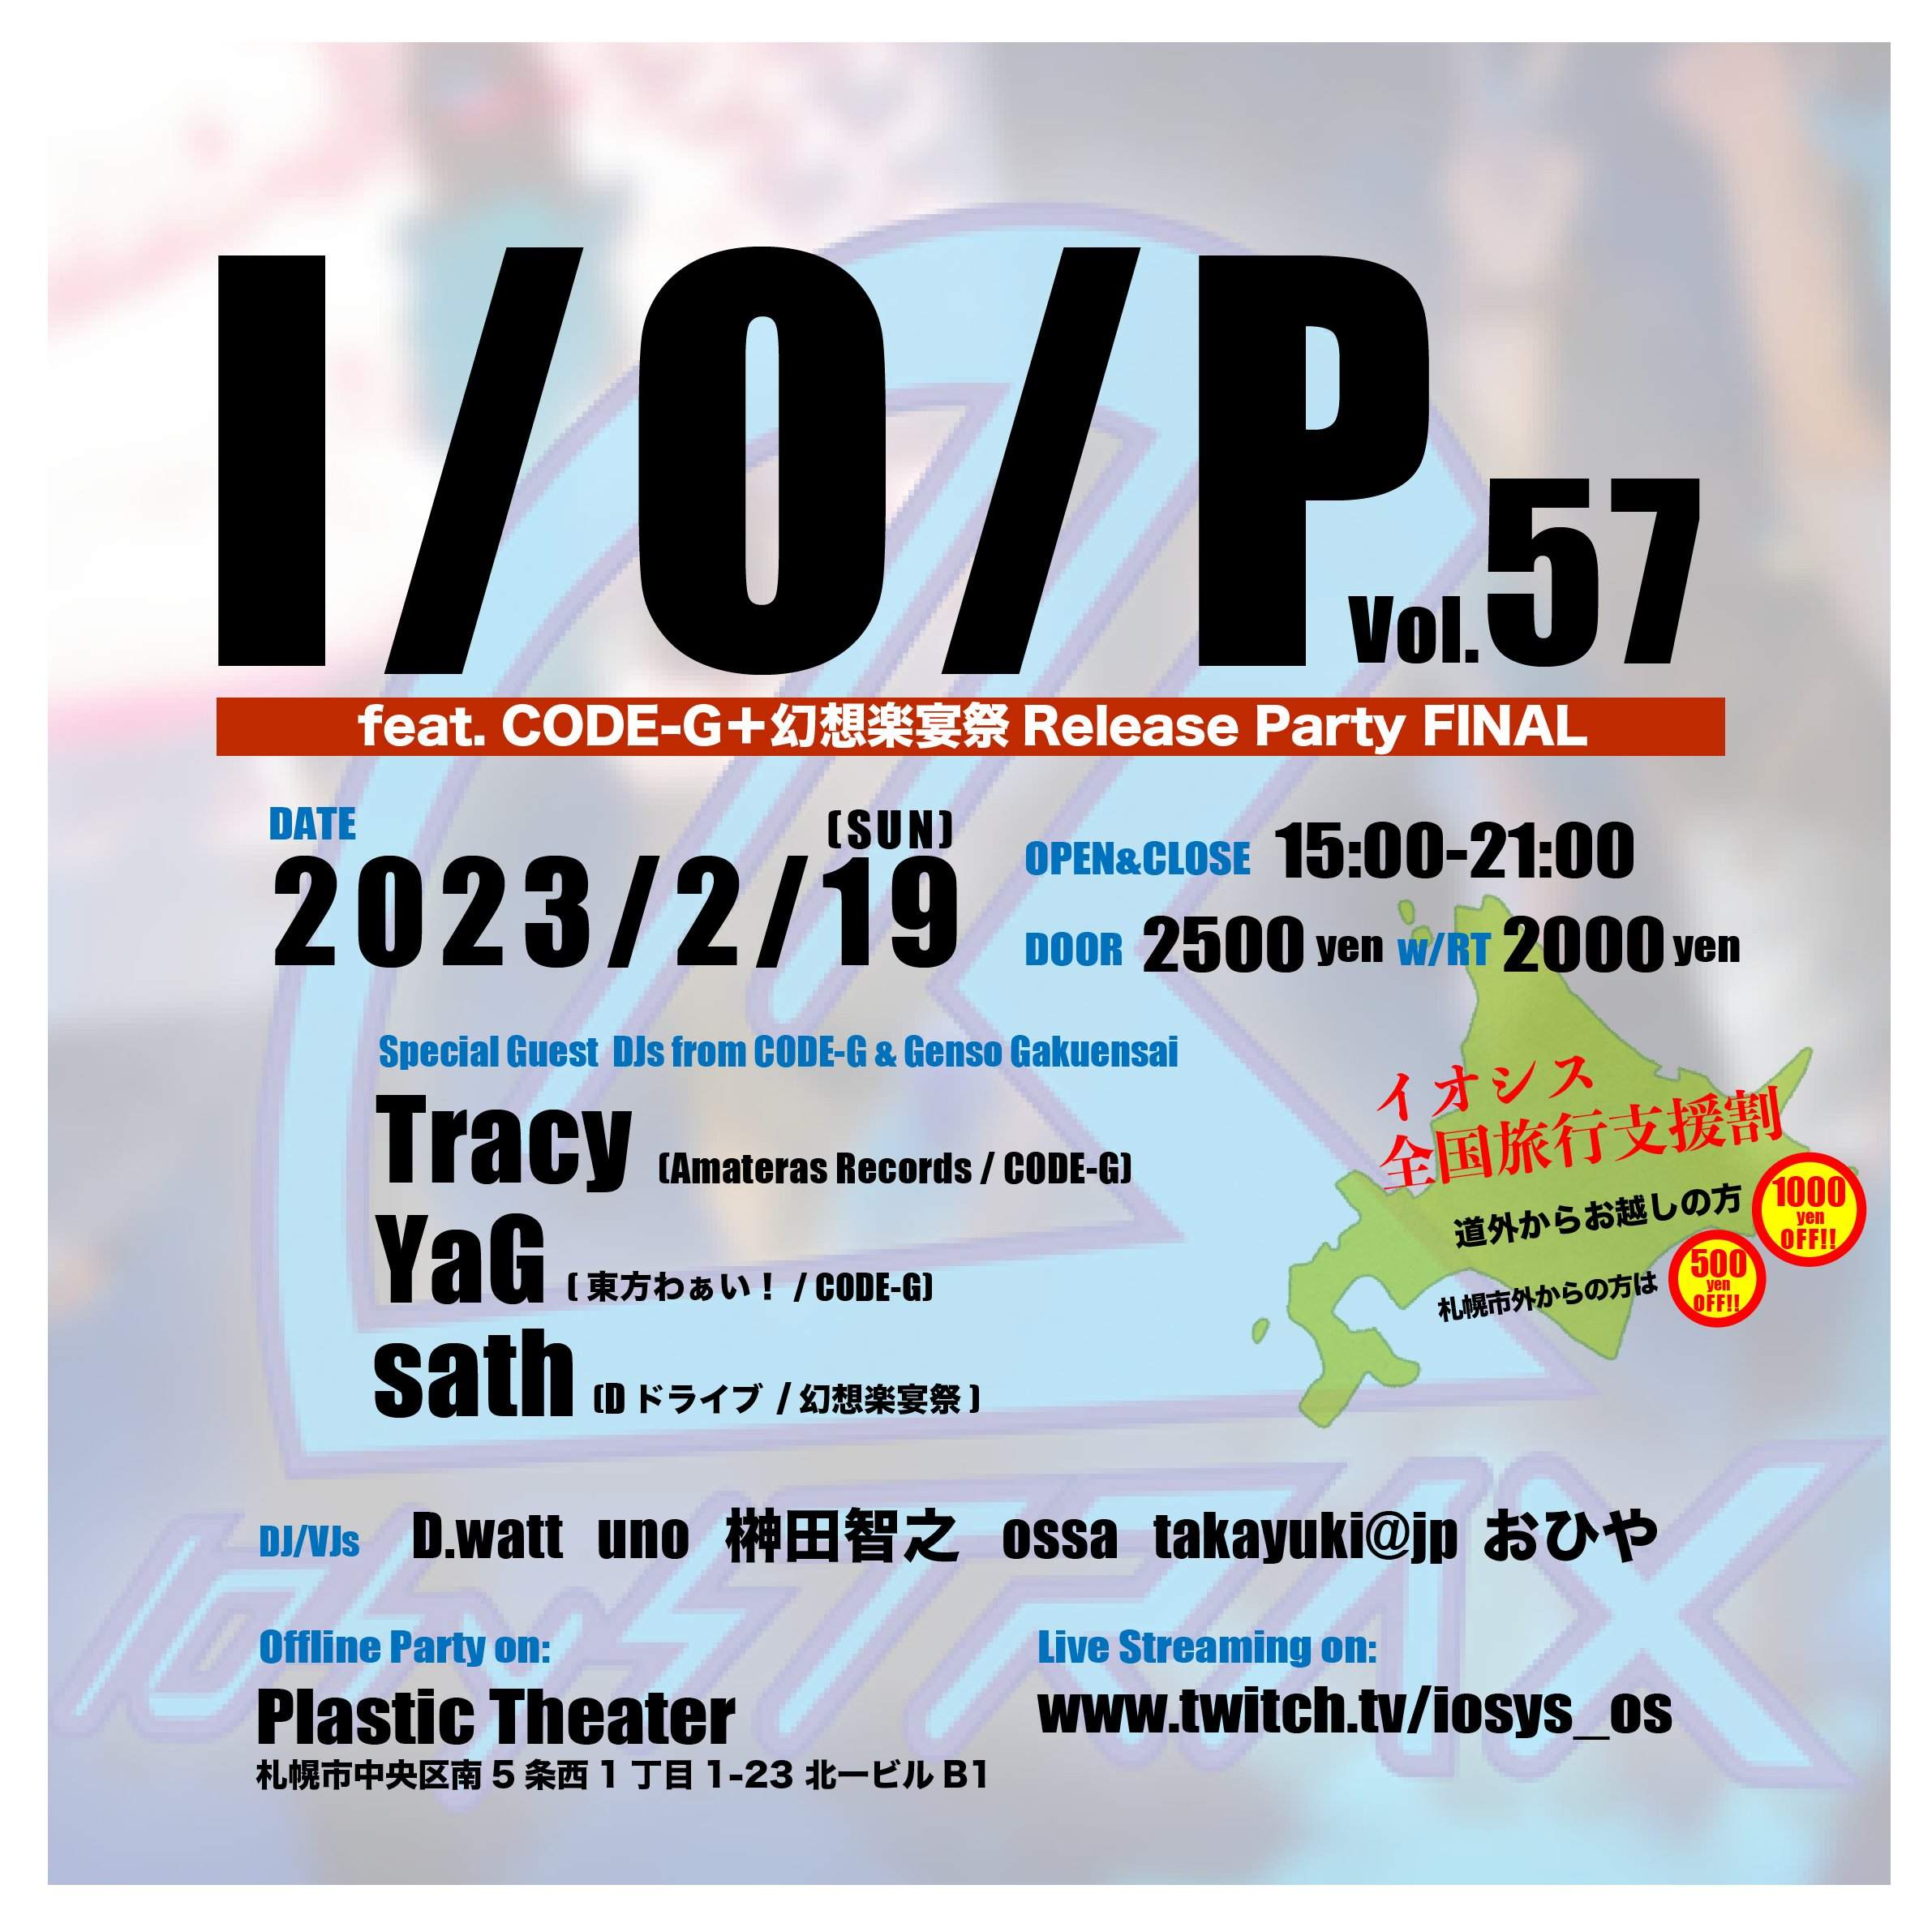 I/O/P Vol.57 feat. CODE-G & 幻想楽宴祭 Release Party FINAL #イオパ - フライヤー表